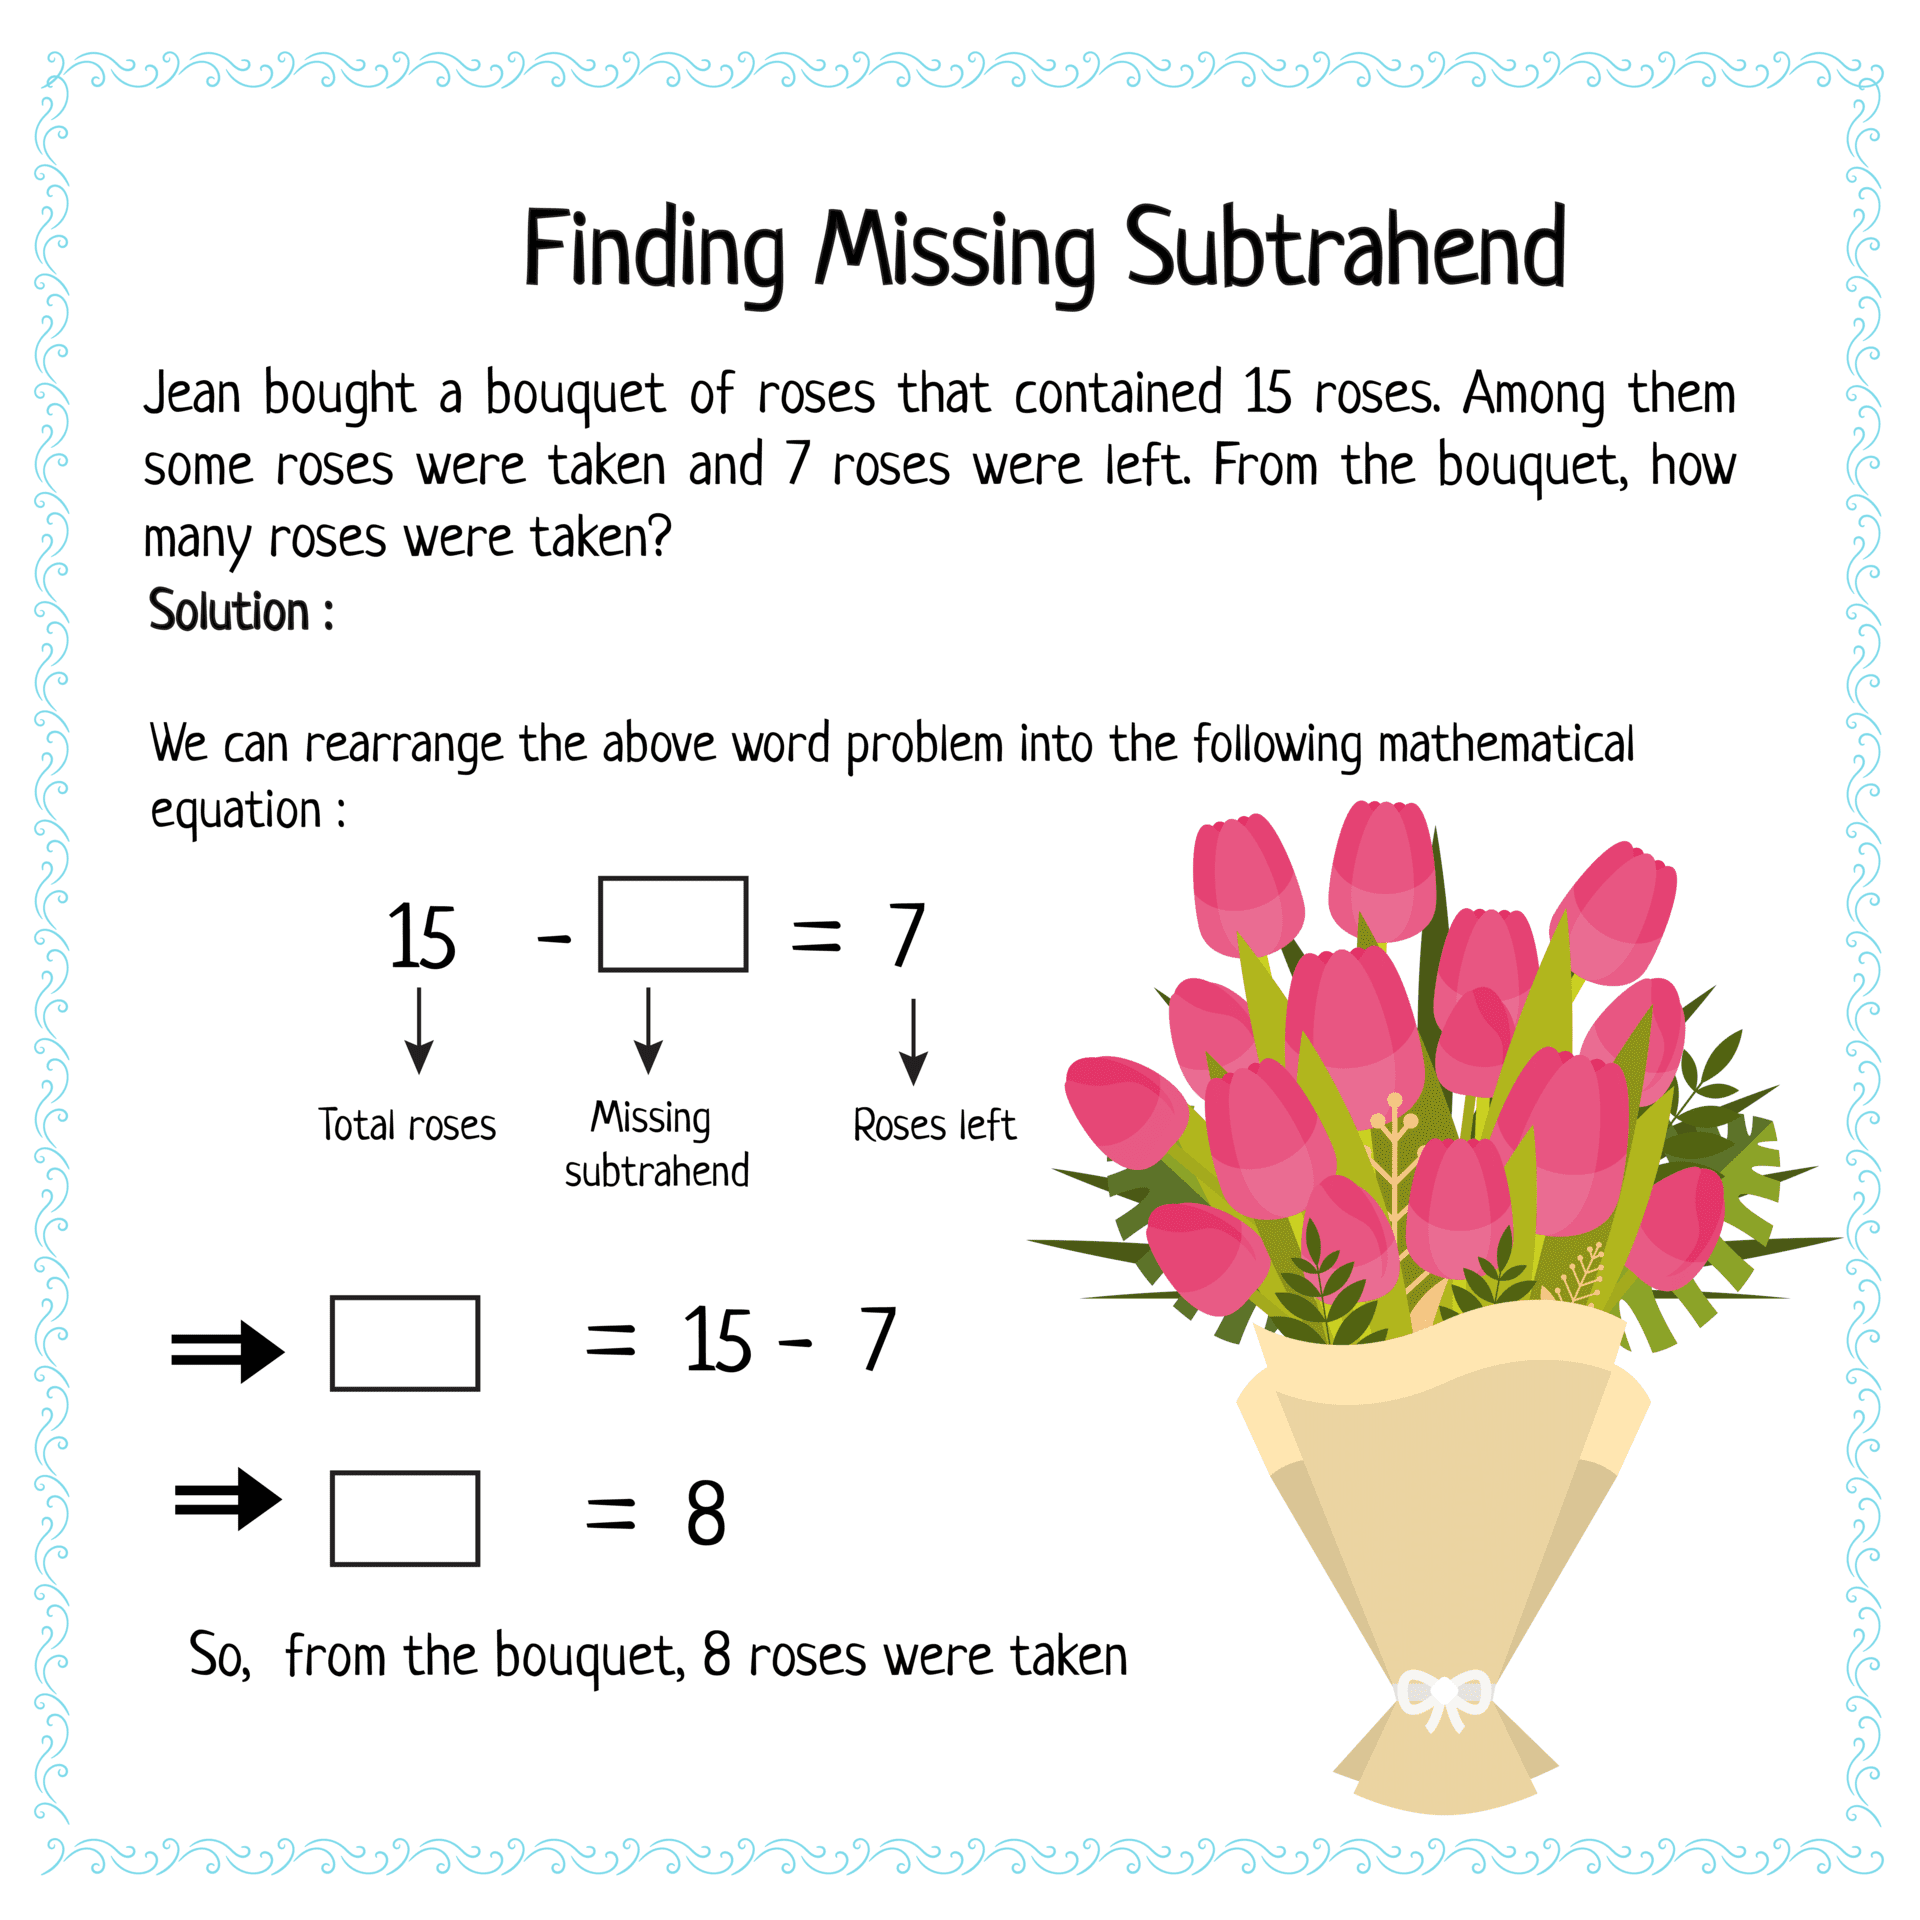 Finding Missing Subtrehand